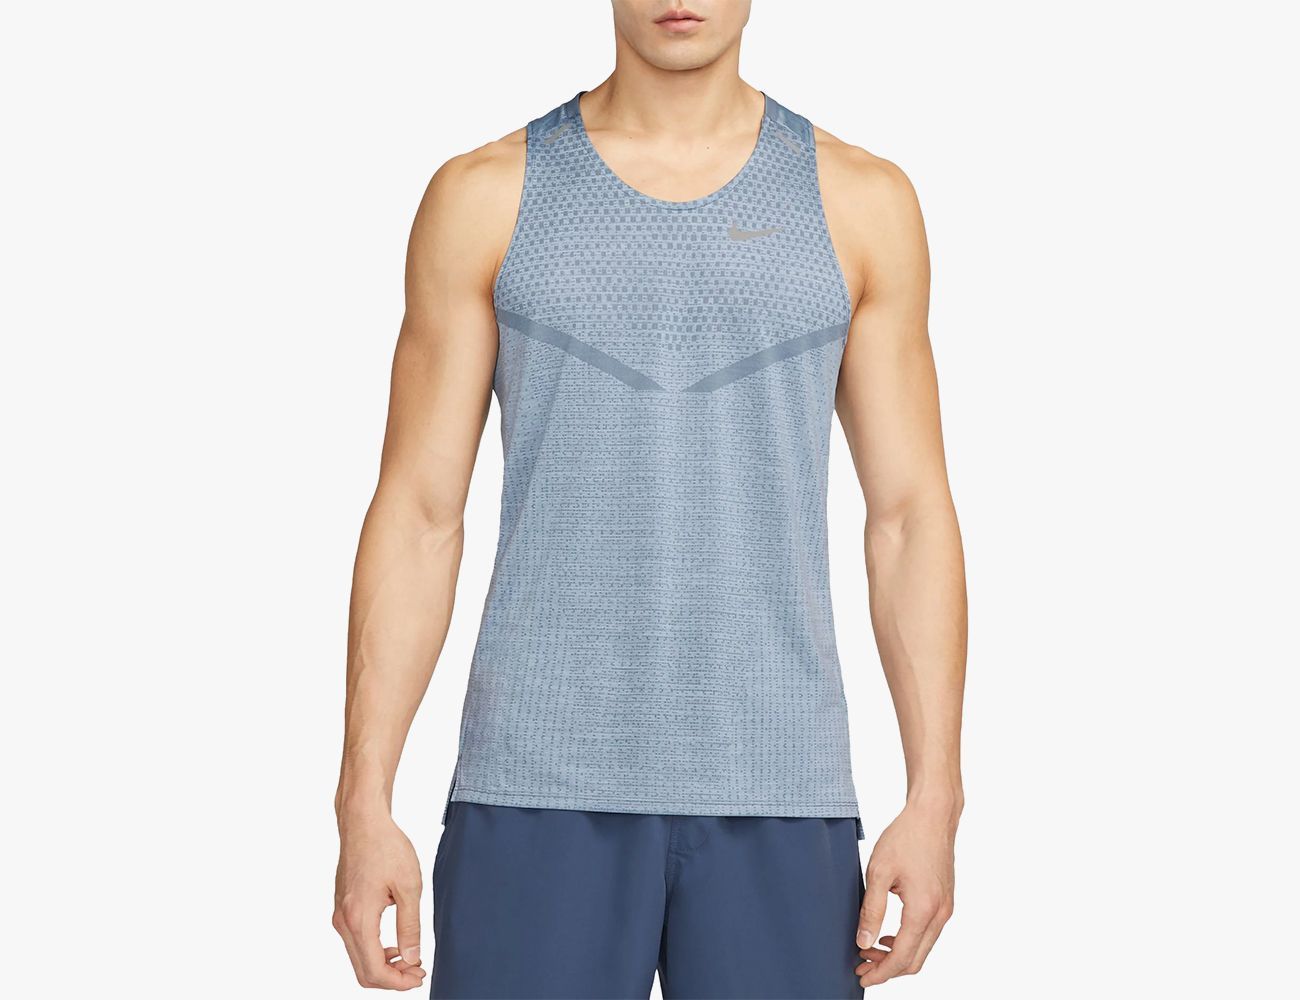 Top Workout Shirts | tunersread.com